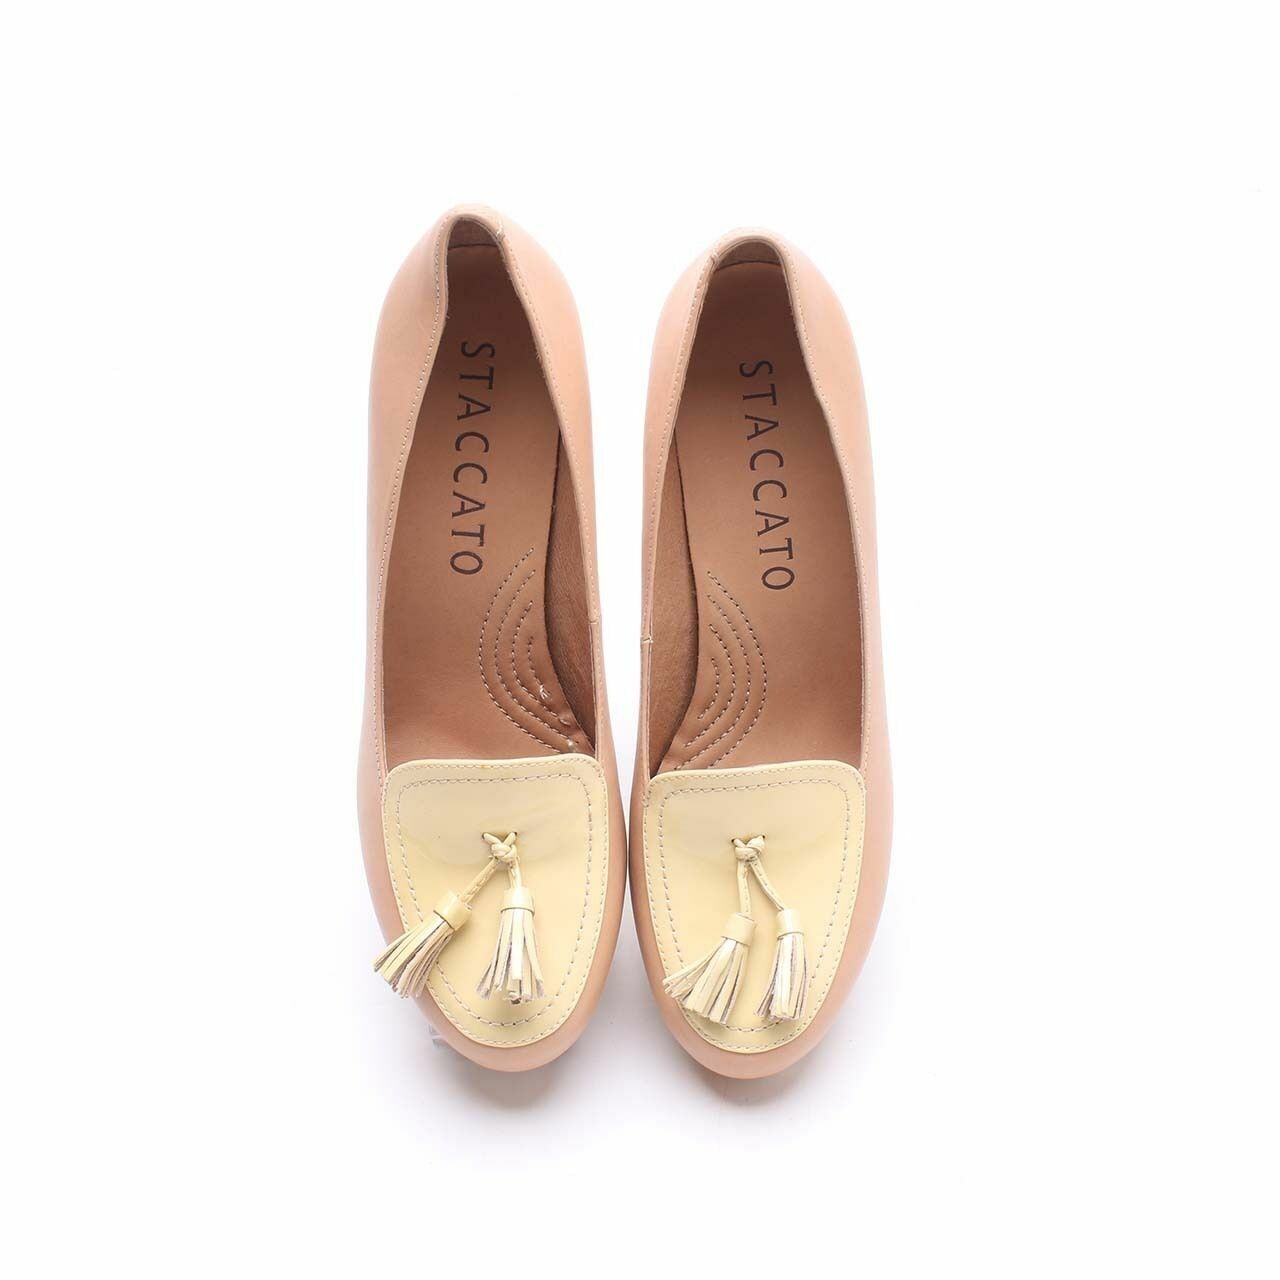 Staccato Nude Leather Wedges